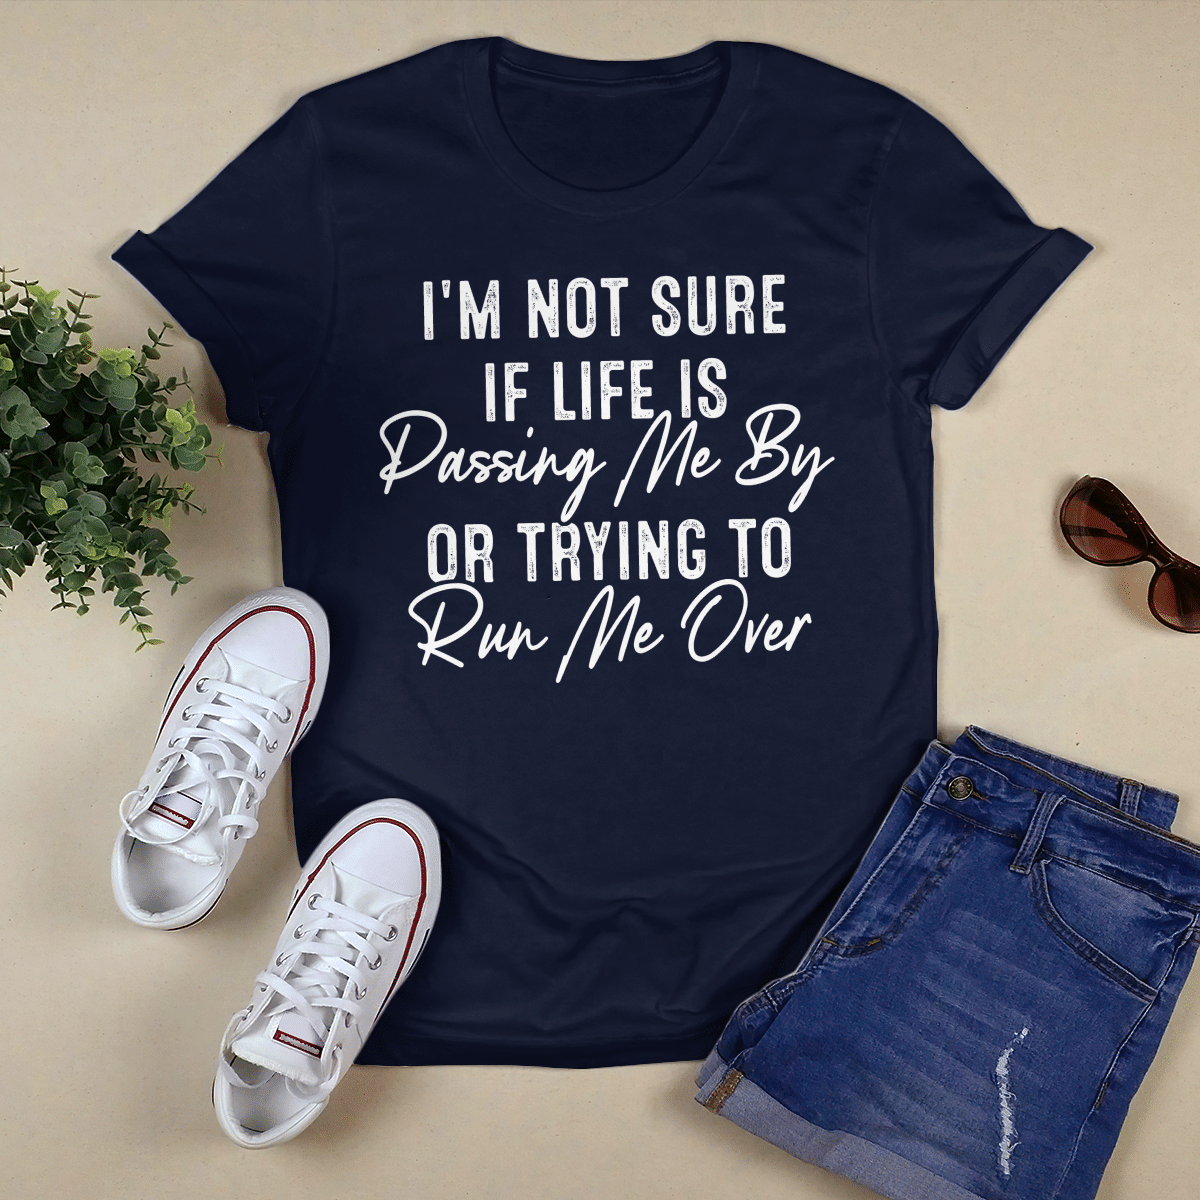 I_m Not Sure If Life Is Passing Me By shirt